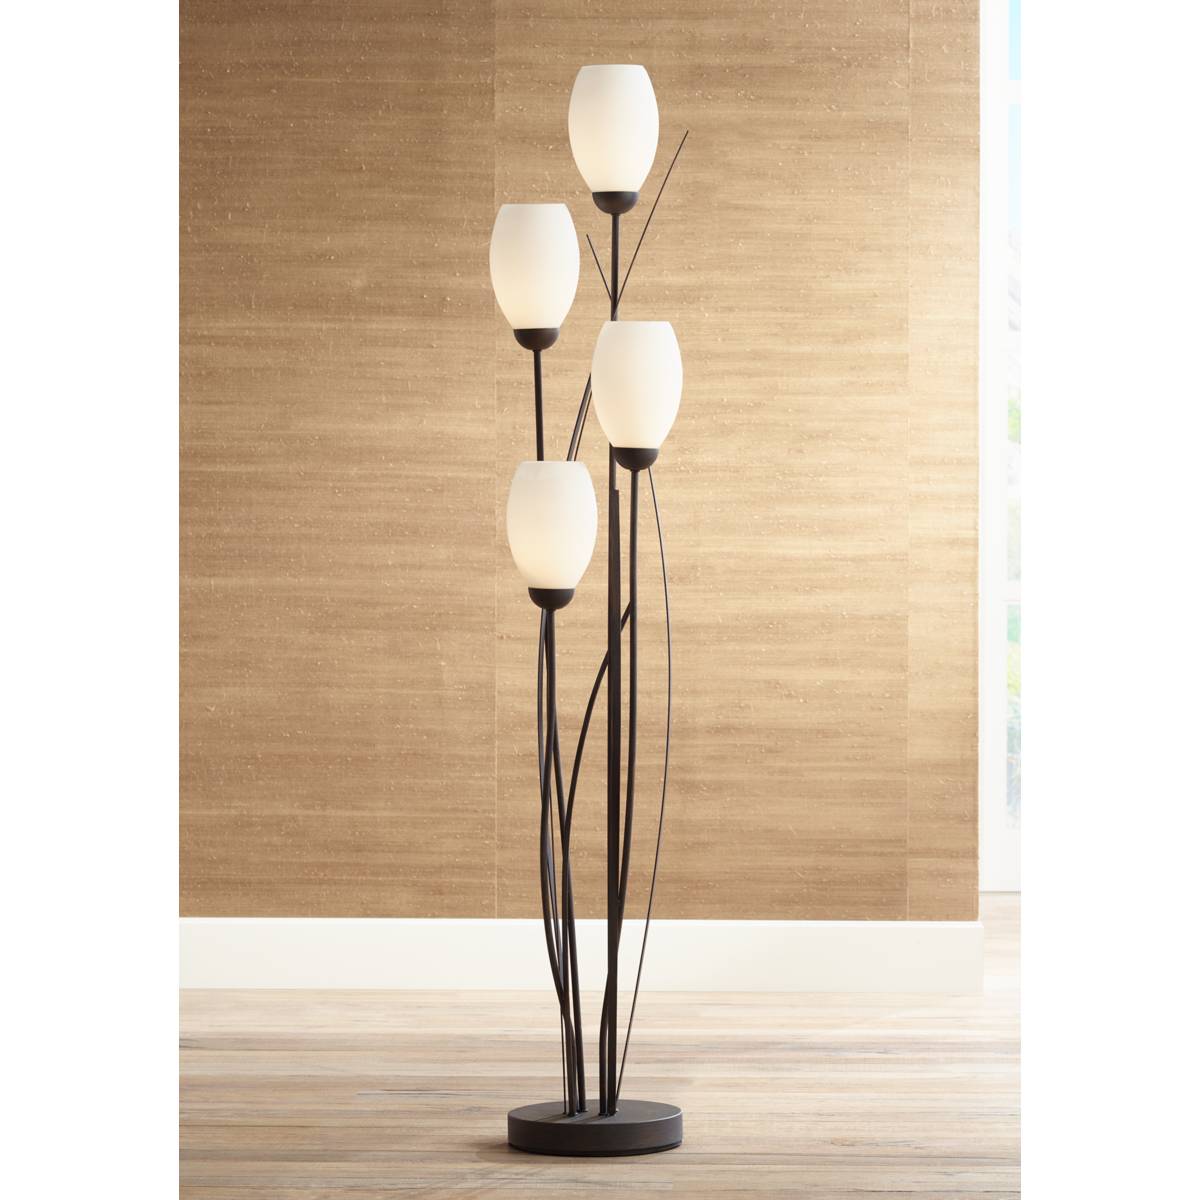 73 In. And Up   Extra Tall, Floor Lamps   Lamps Plus